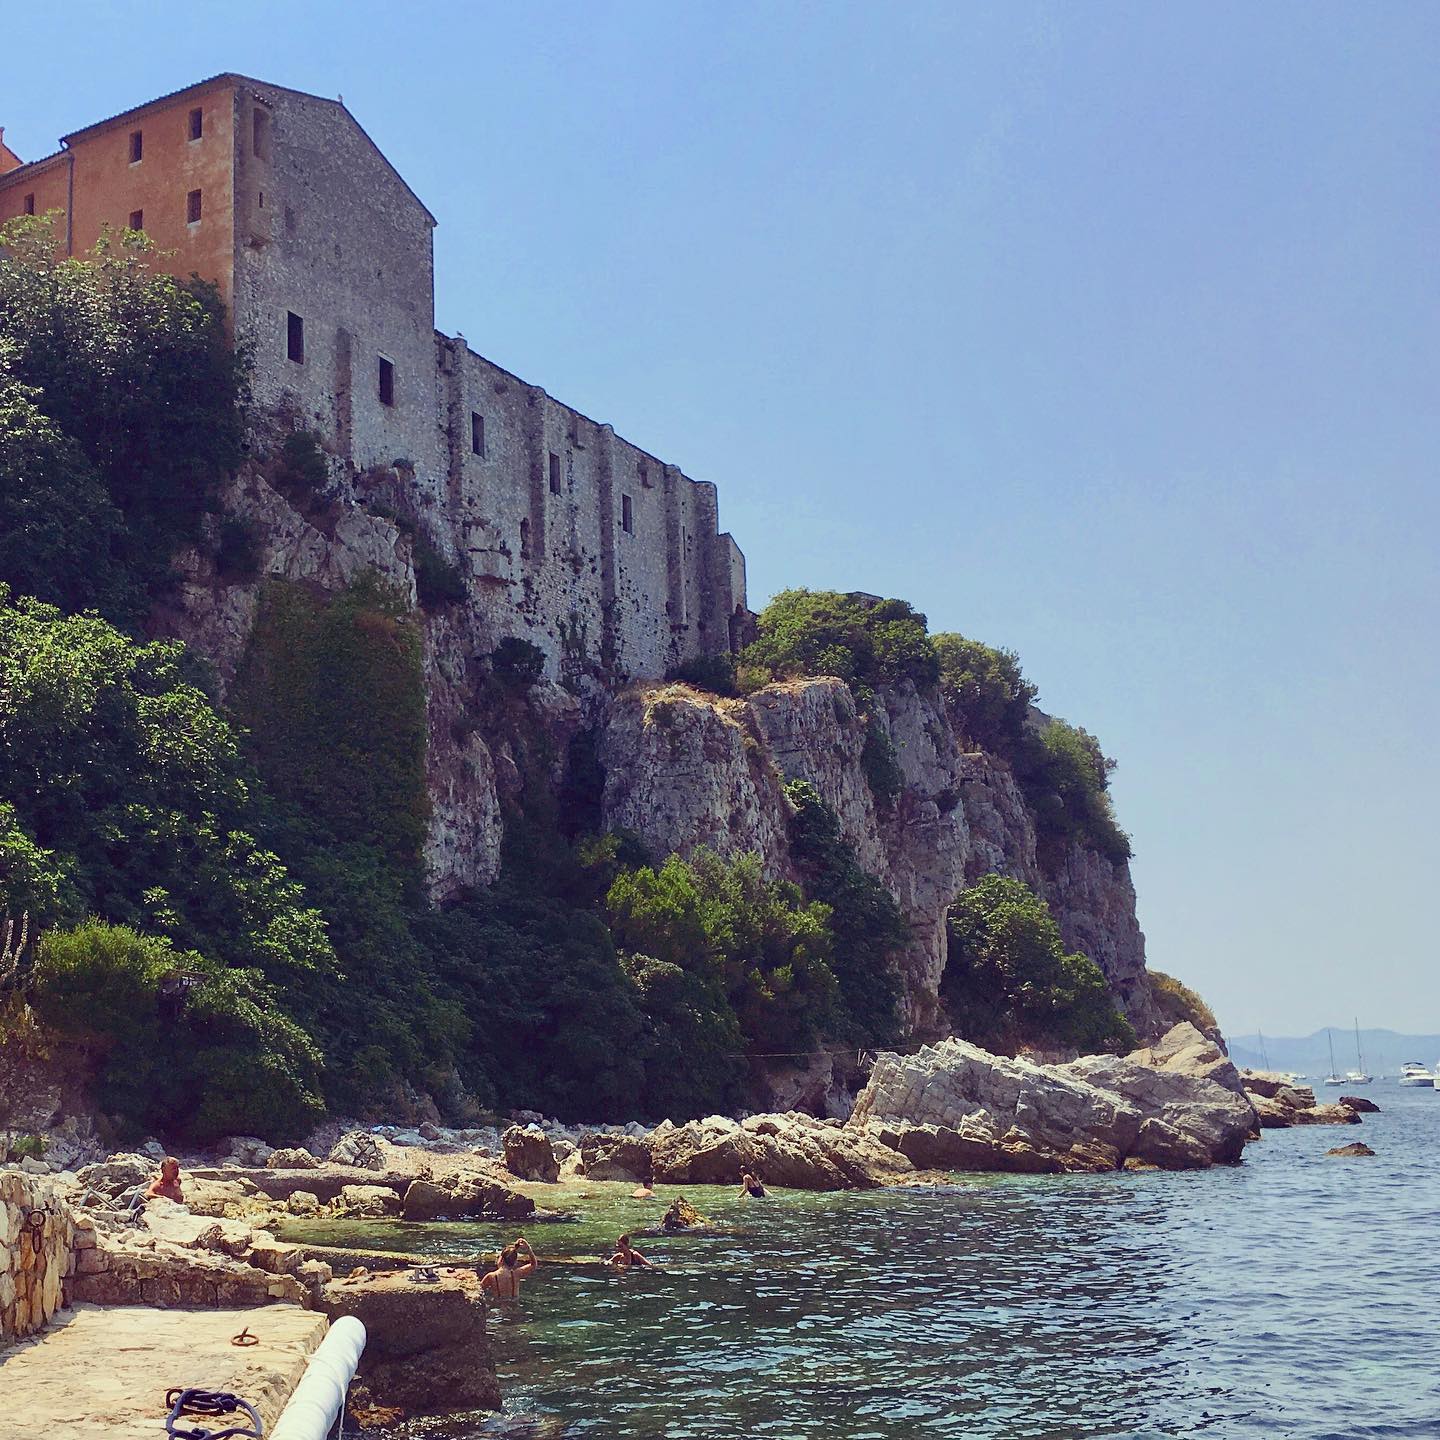 Scrolling through images of the Côte d’Azur on Instagram, I’m feeling all Man-in-the-Iron-Mask. He (or she, no one is sure) lived here in le Fort Royal in the 1600s. The prison was set at the edge of l’Île Sainte-Marguerite, letting him gaze on the splendour of Cannes and the sea - but with all the obvious restrictions in place, he couldn’t get there. (In our case, let’s just hang in there.)
#lerinsislands #ilesdelerins #cotedazur #rivieralife #ilesaintemarguerite #cannes #manintheironmask #someday